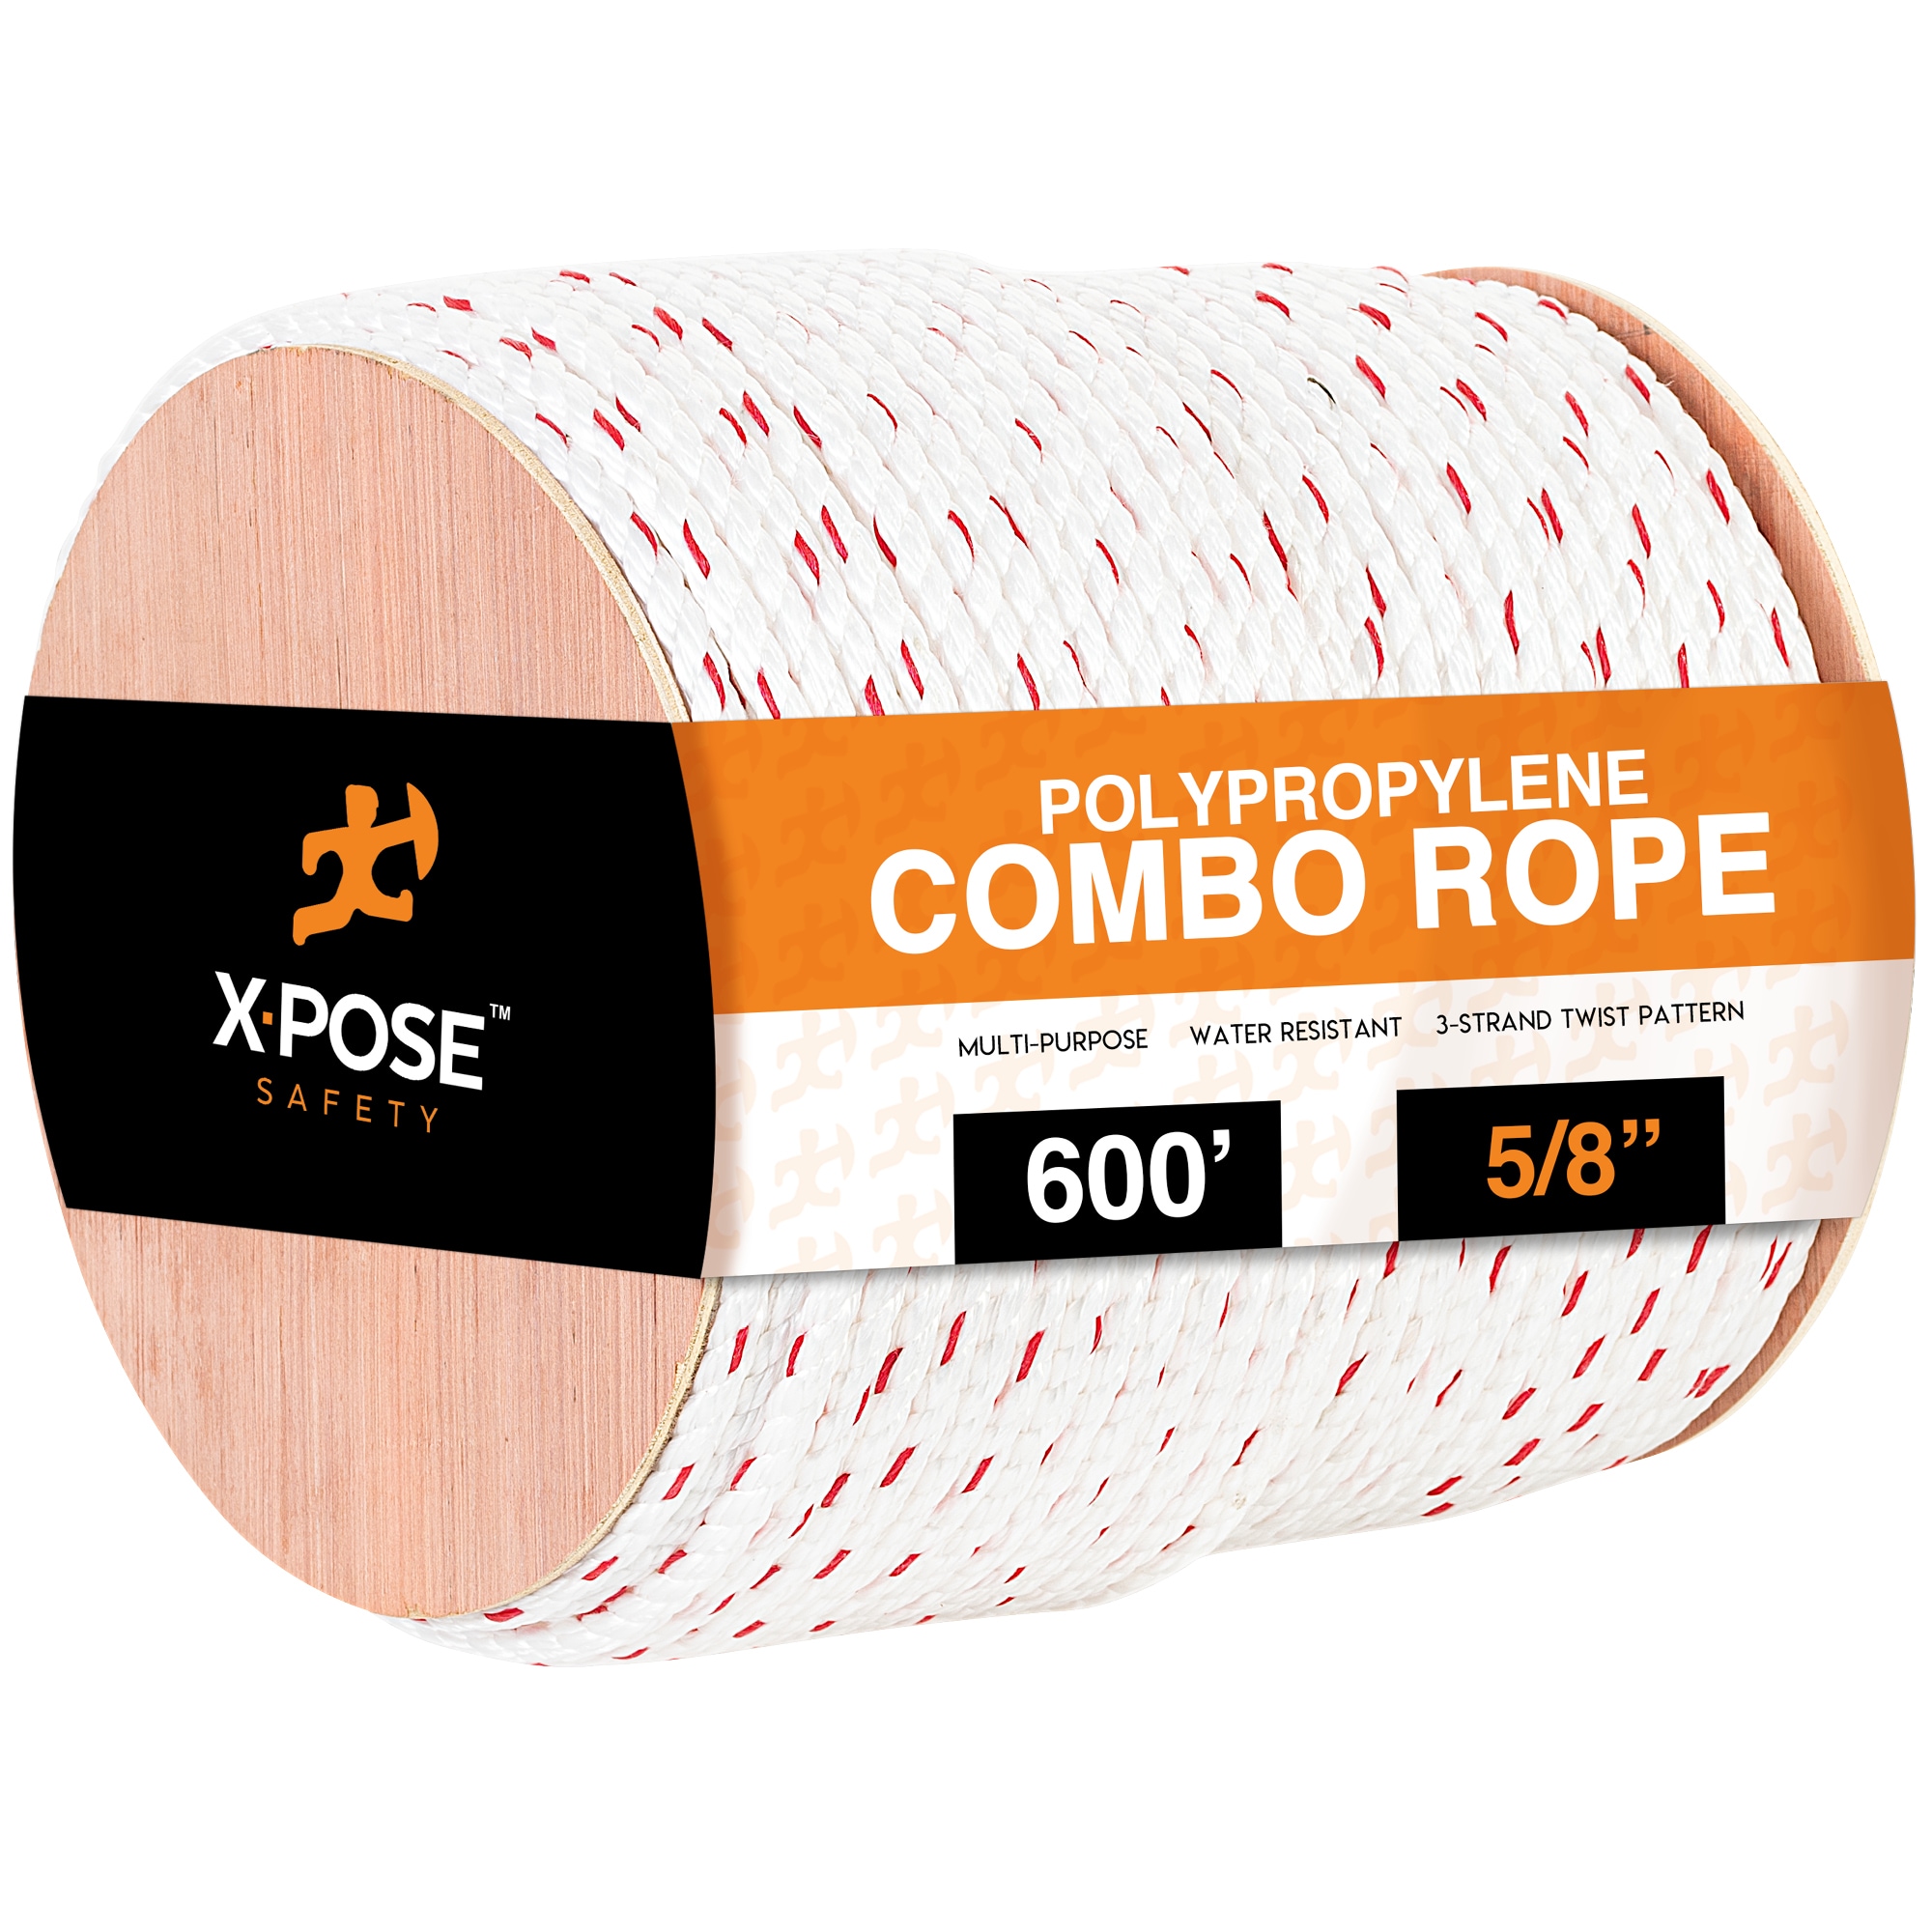 XPOSE SAFETY Nylon Twine - 275 Ft Nylon String - Synthetic Thin Twine String  - Indoor and Outdoor Use for Crafts, Camping, Garden, Line Level, Marine,  Fishing, Trot Line, Decoy, Property Markers